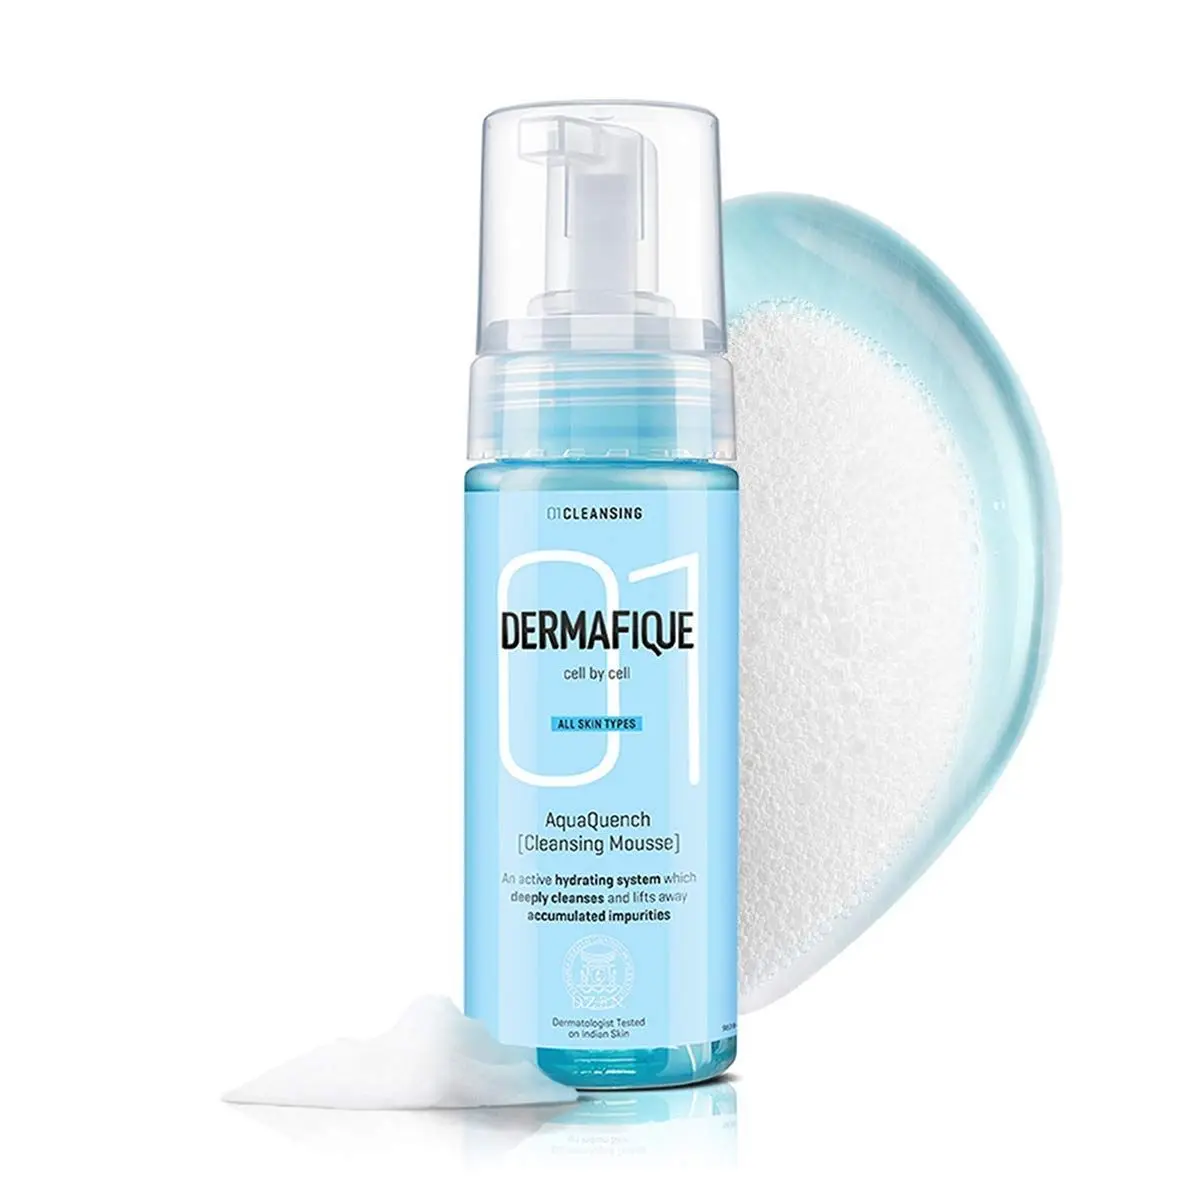 Dermafique Aquaquench Cleansing Mousse, 150 ml - For Dry Skin - Foaming Face Wash- For Deep Cleansing and Hydration - Paraben free, SLES-free - Dermatologist Tested